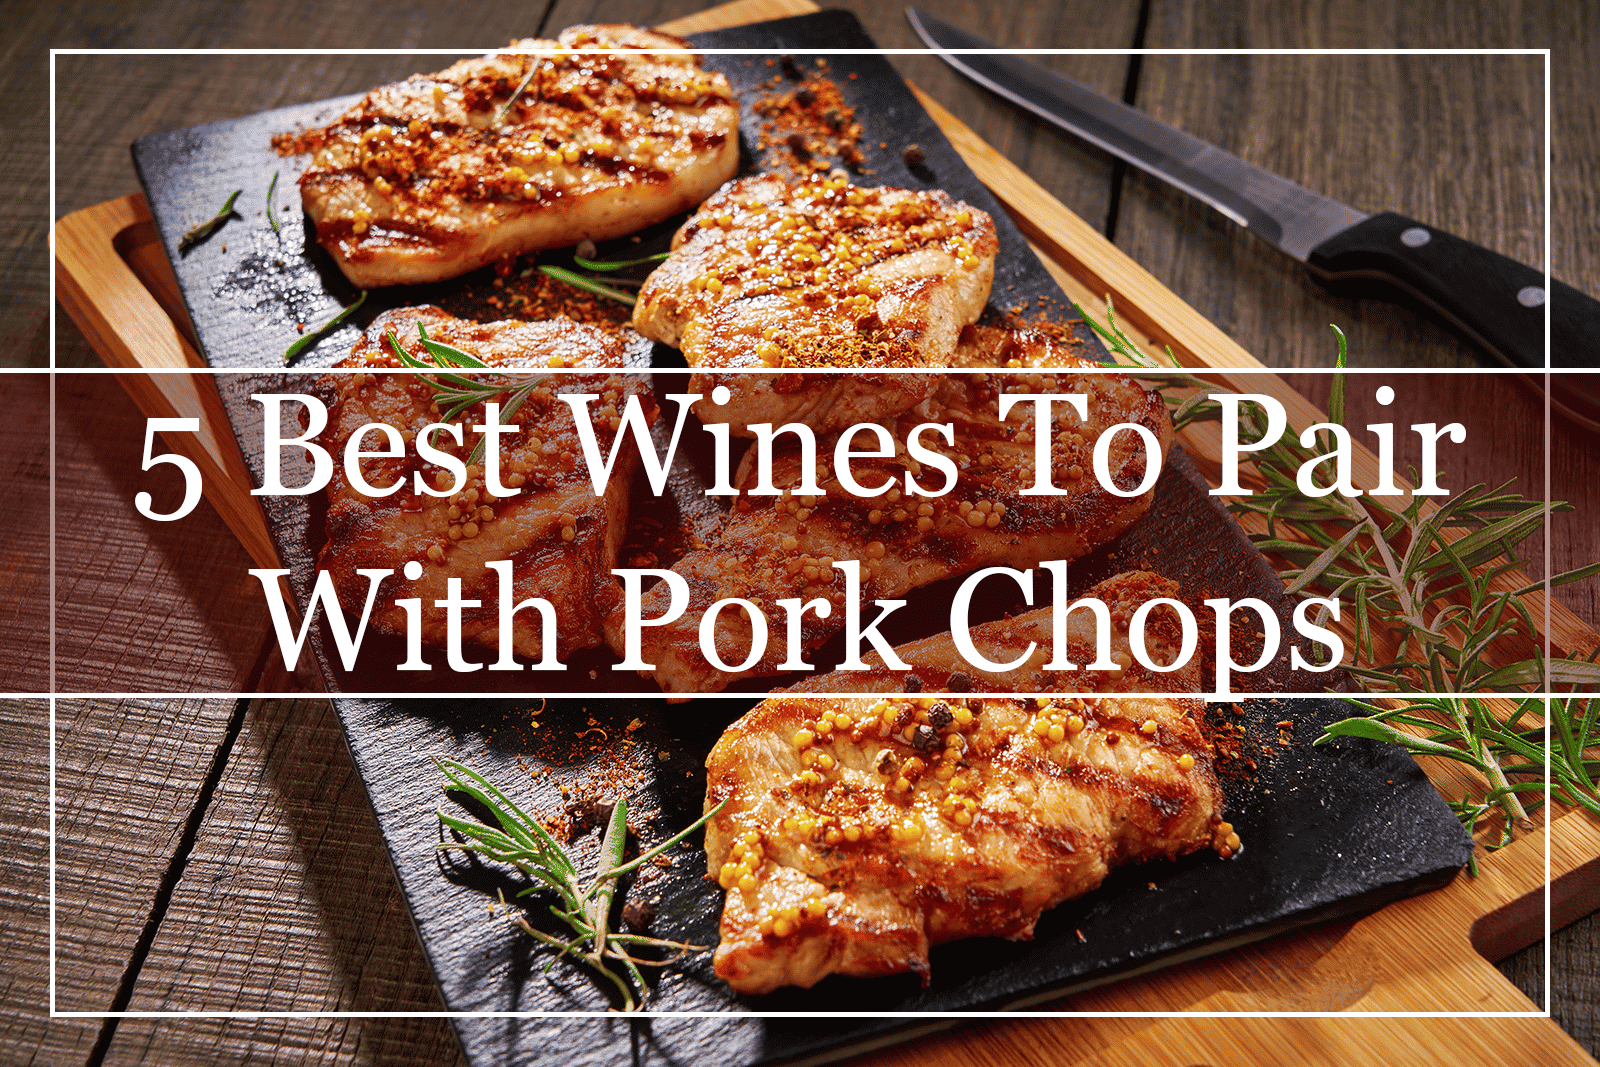 5 Best Wines to Pair With Pork Chops (2022)